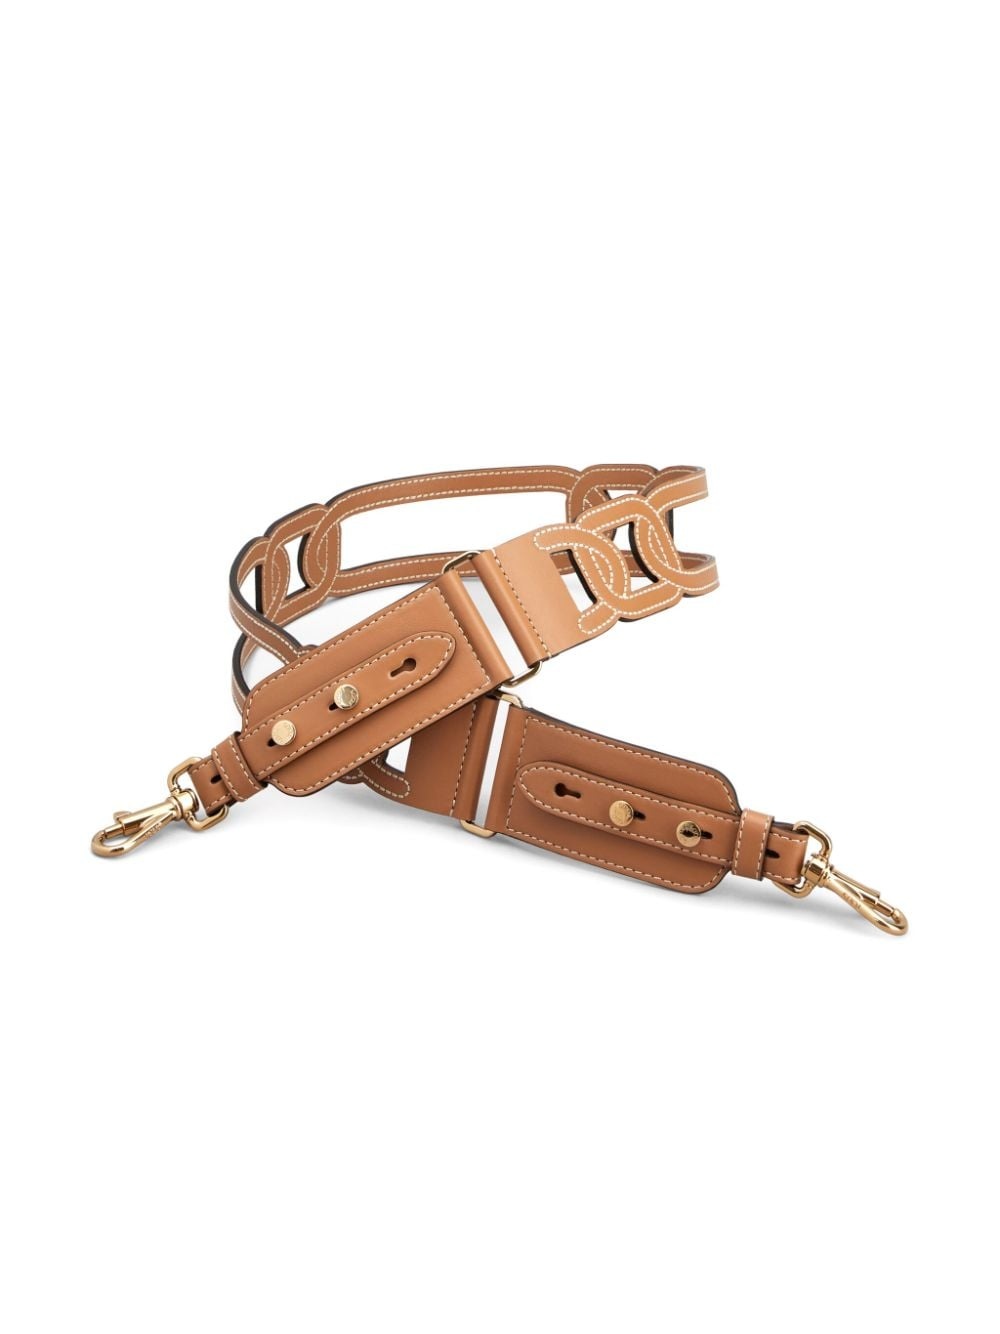 cut-out leather bag strap - 2